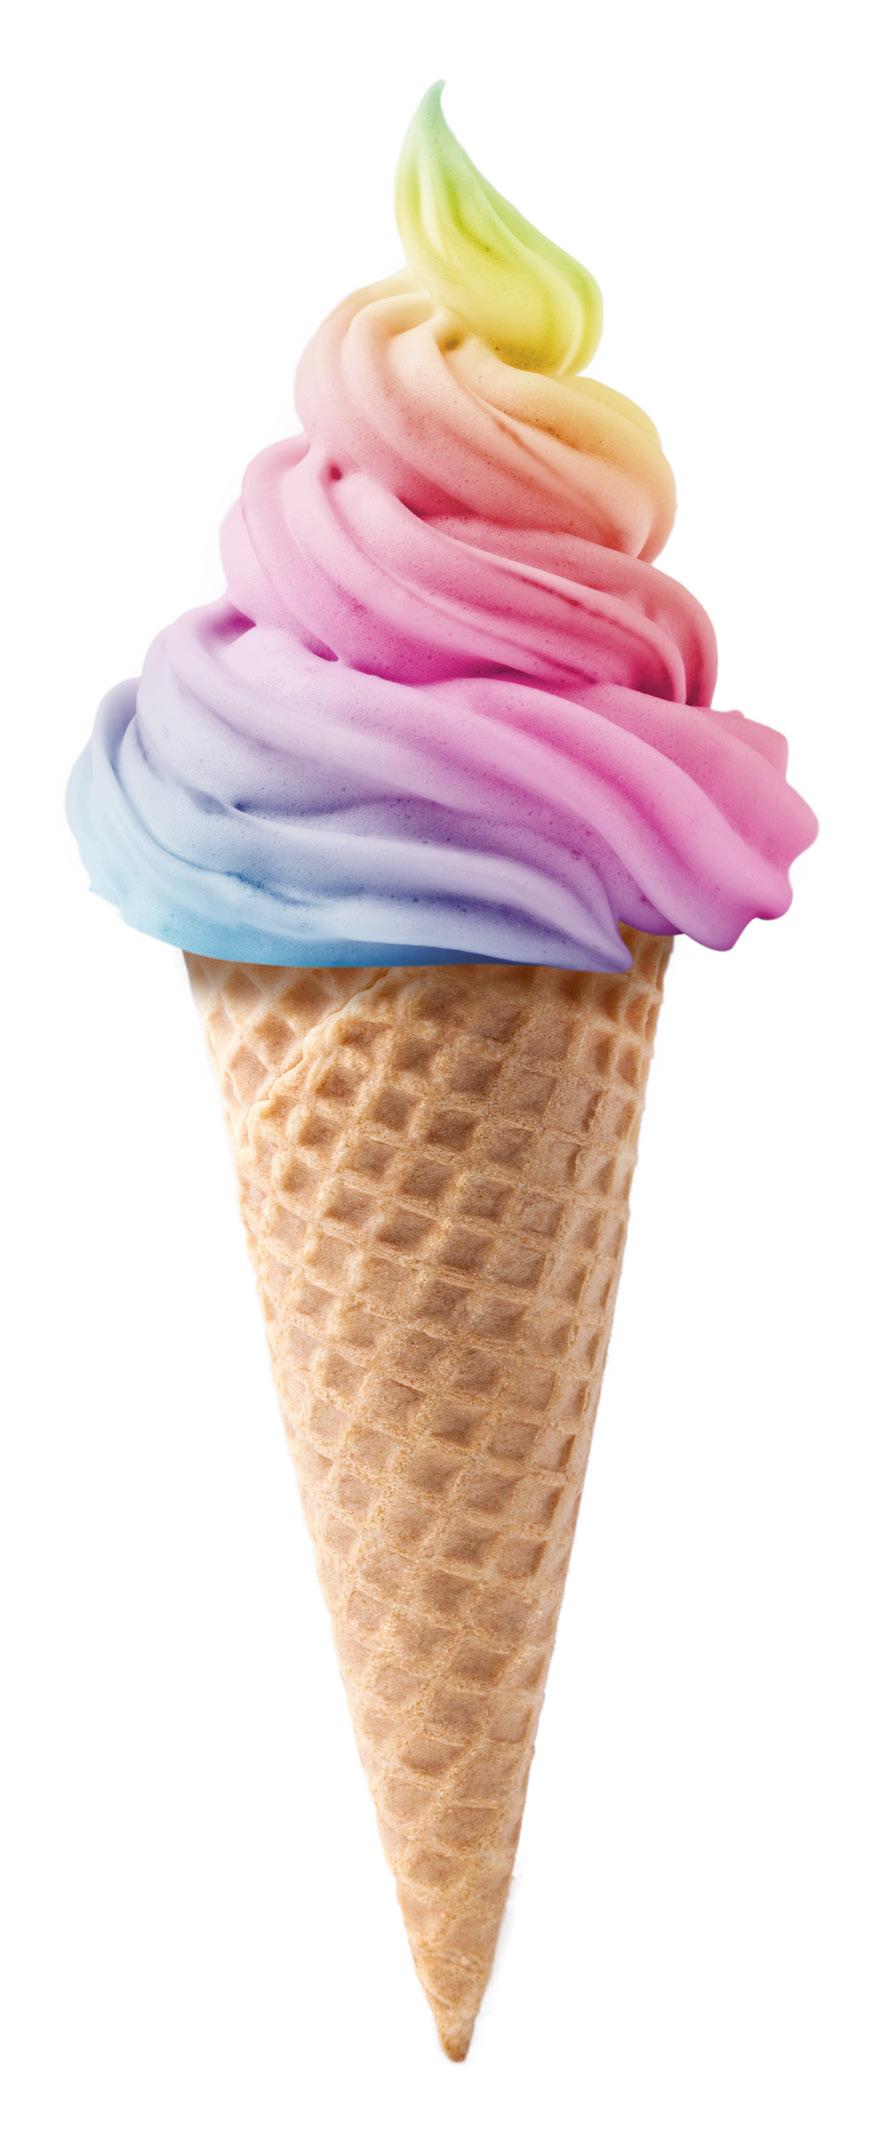 UNIVERSALLY BELOVED It s rare to find a food product so beloved as ice cream. In fact, research shows that 94% of consumers purchase frozen treats and 87% purchase ice cream specifically.